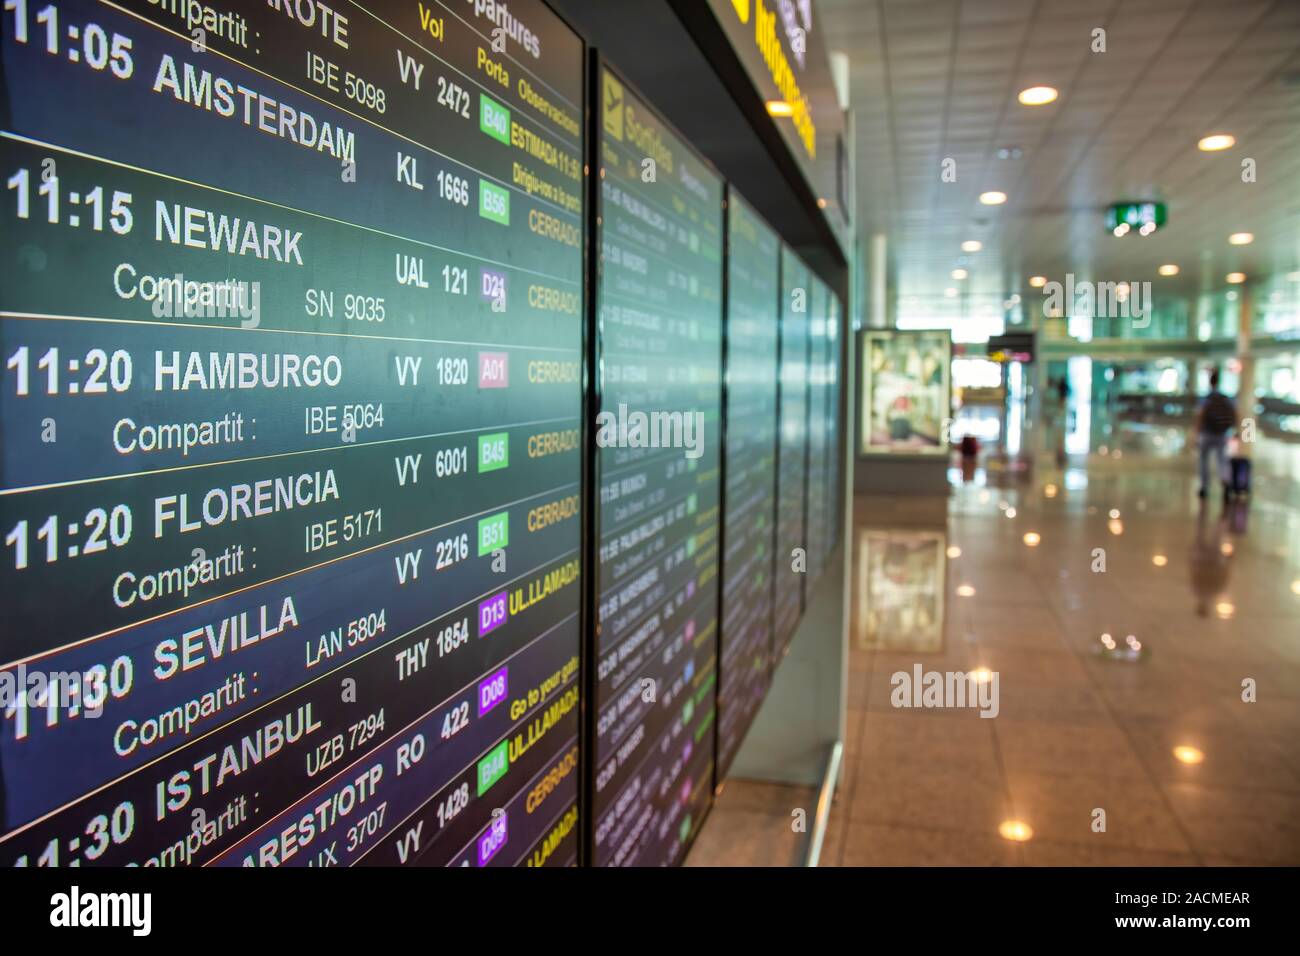 Information monitor with timetable in airport Barcelona in Spain Stock Photo